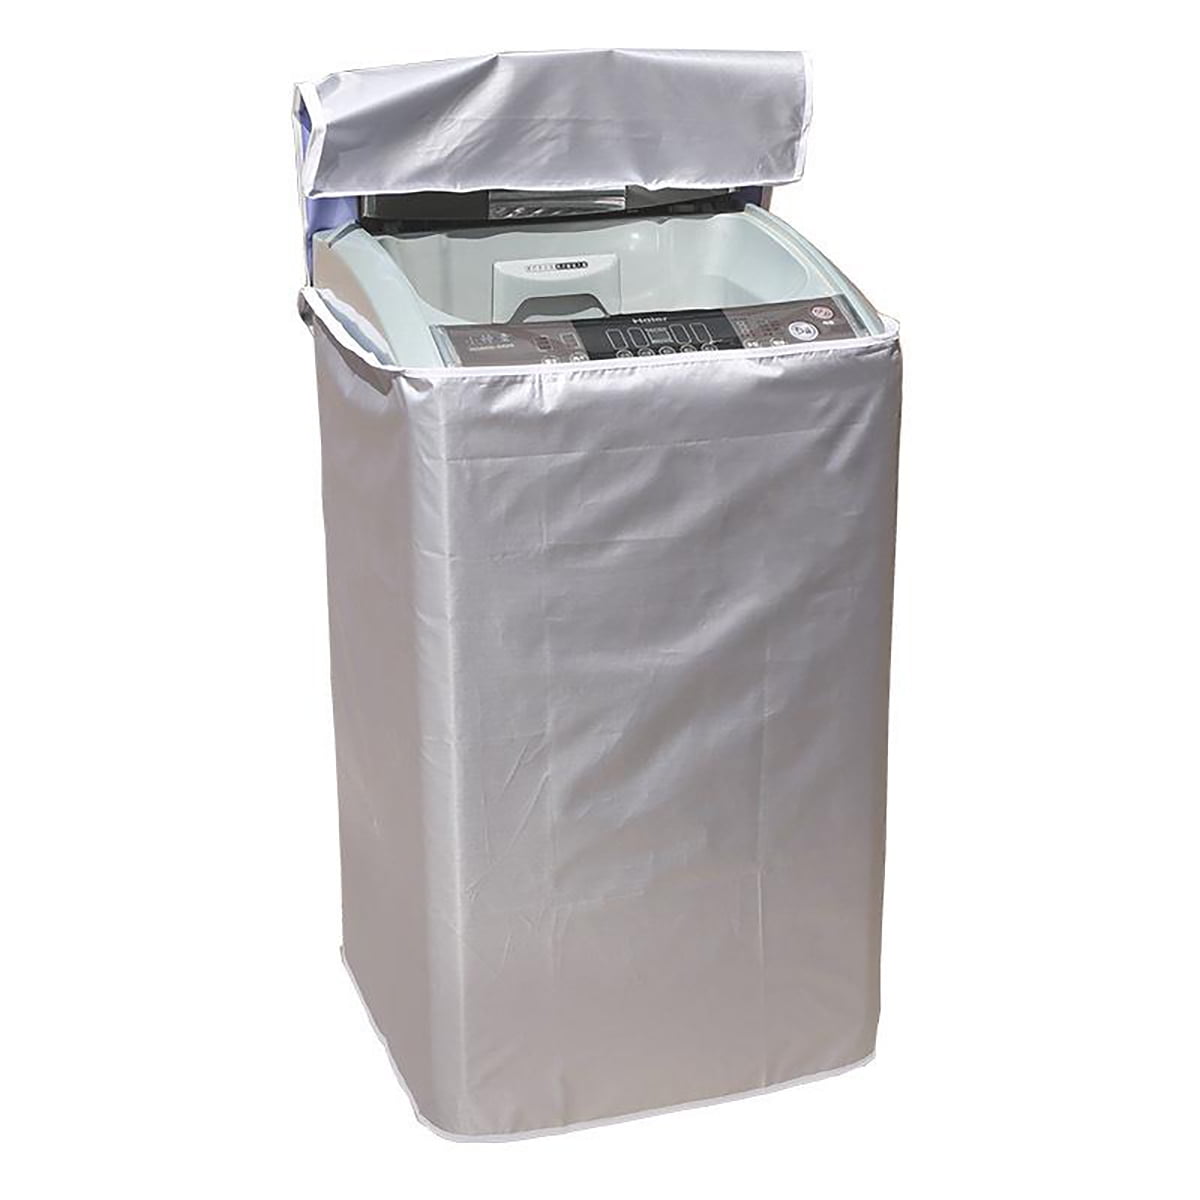 Details about   Home Laundry Dryer Cover For Washing Machine Waterproof Dust-proof Case Covers 